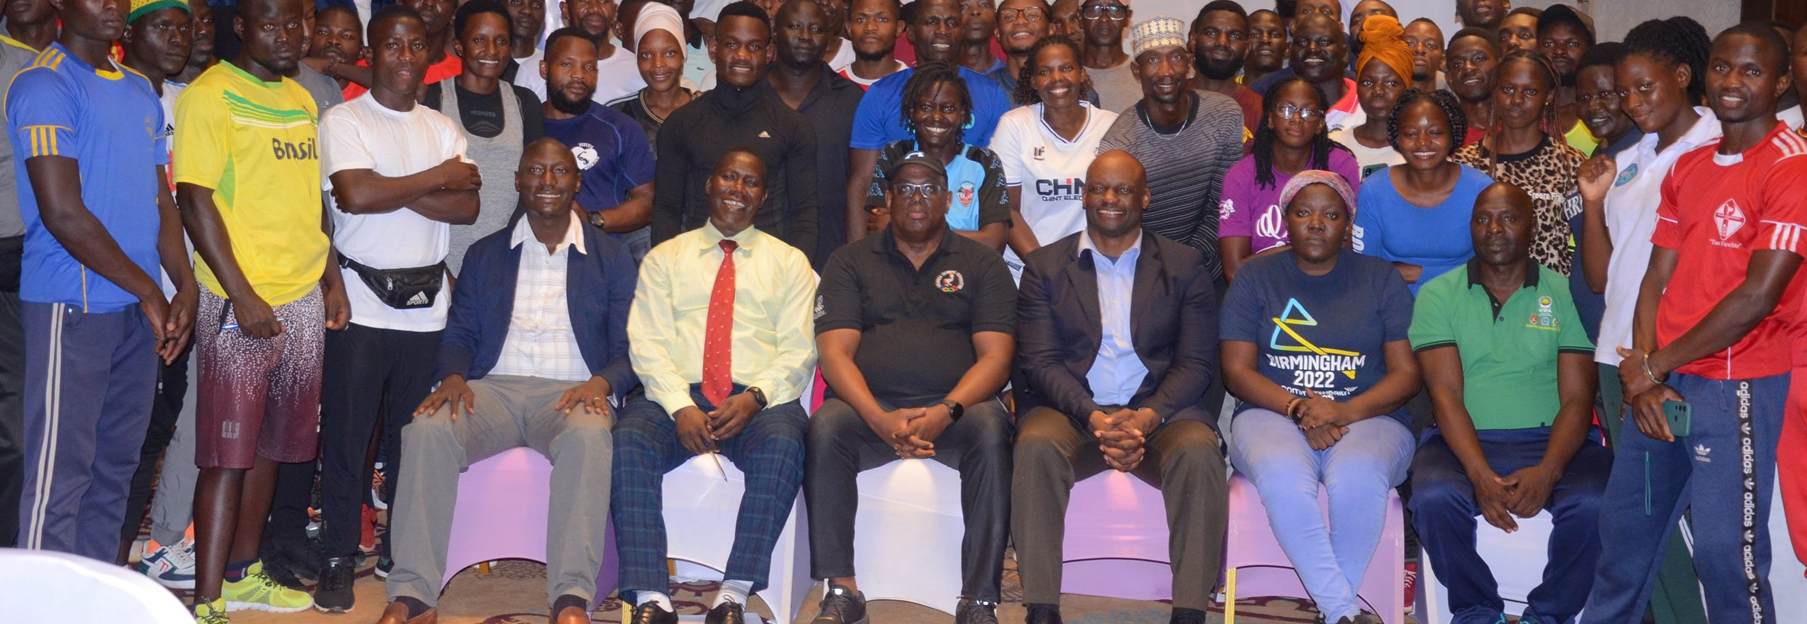 More than 75 poeple attended the workshop in Kampala City set up by the Uganda Olympic Committee ©UOC